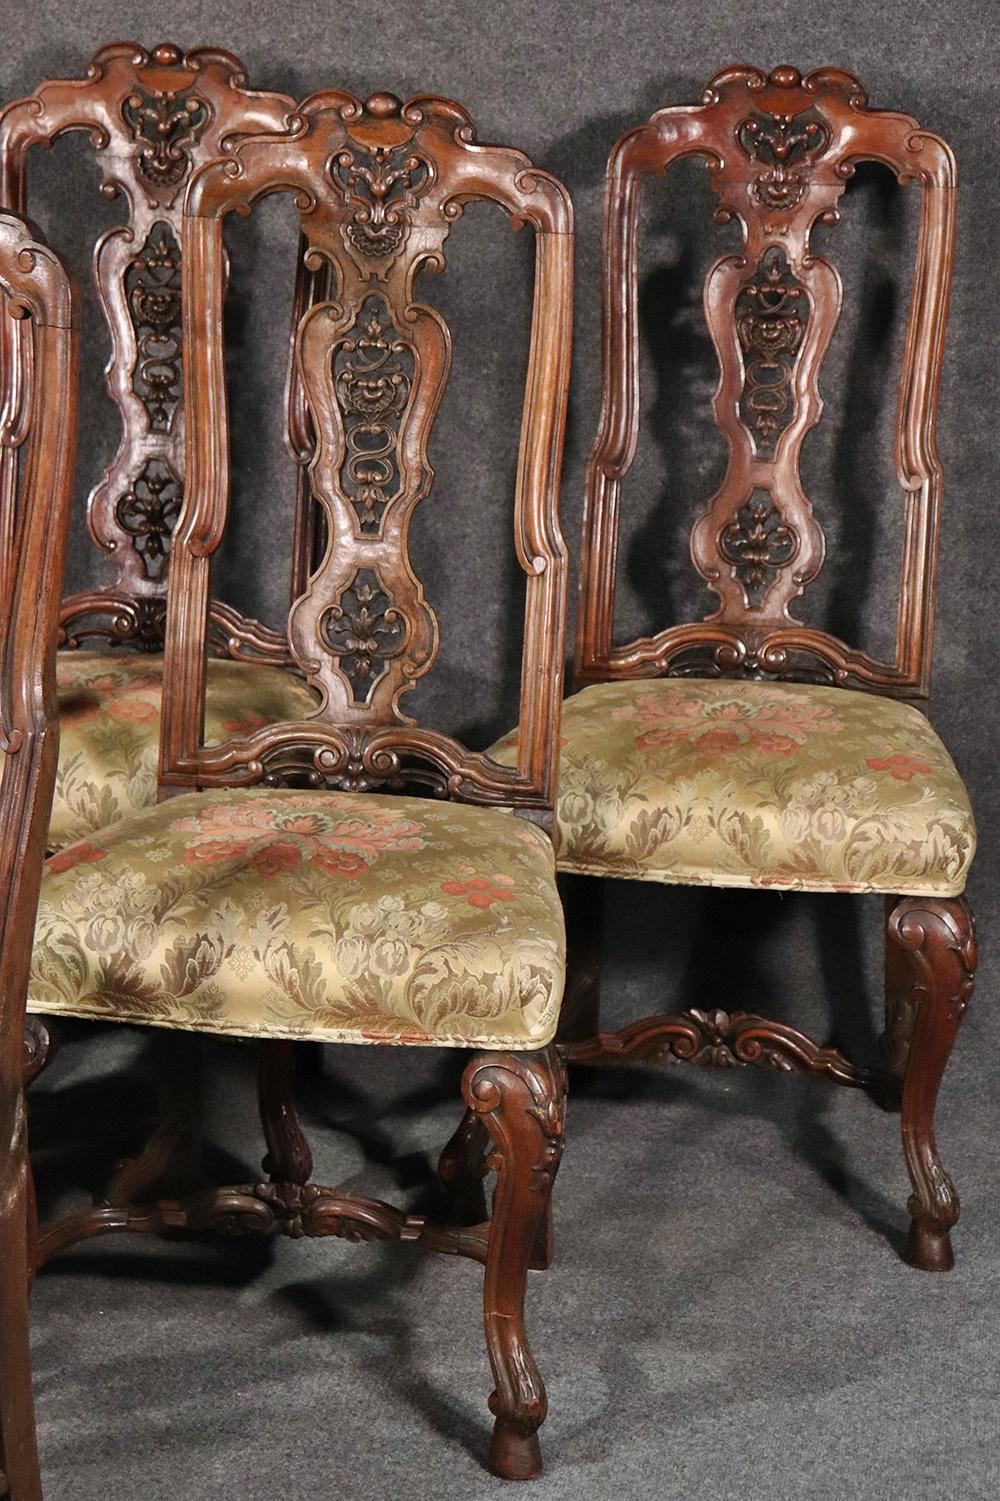 This is a gorgeous set of 6 Italian antique 1890s era carved walnut dining side chairs. The upholstery is a second re-upholstery and is in need of updating. These are beautiful chairs and would look wonderful with a newer silk upholstery.